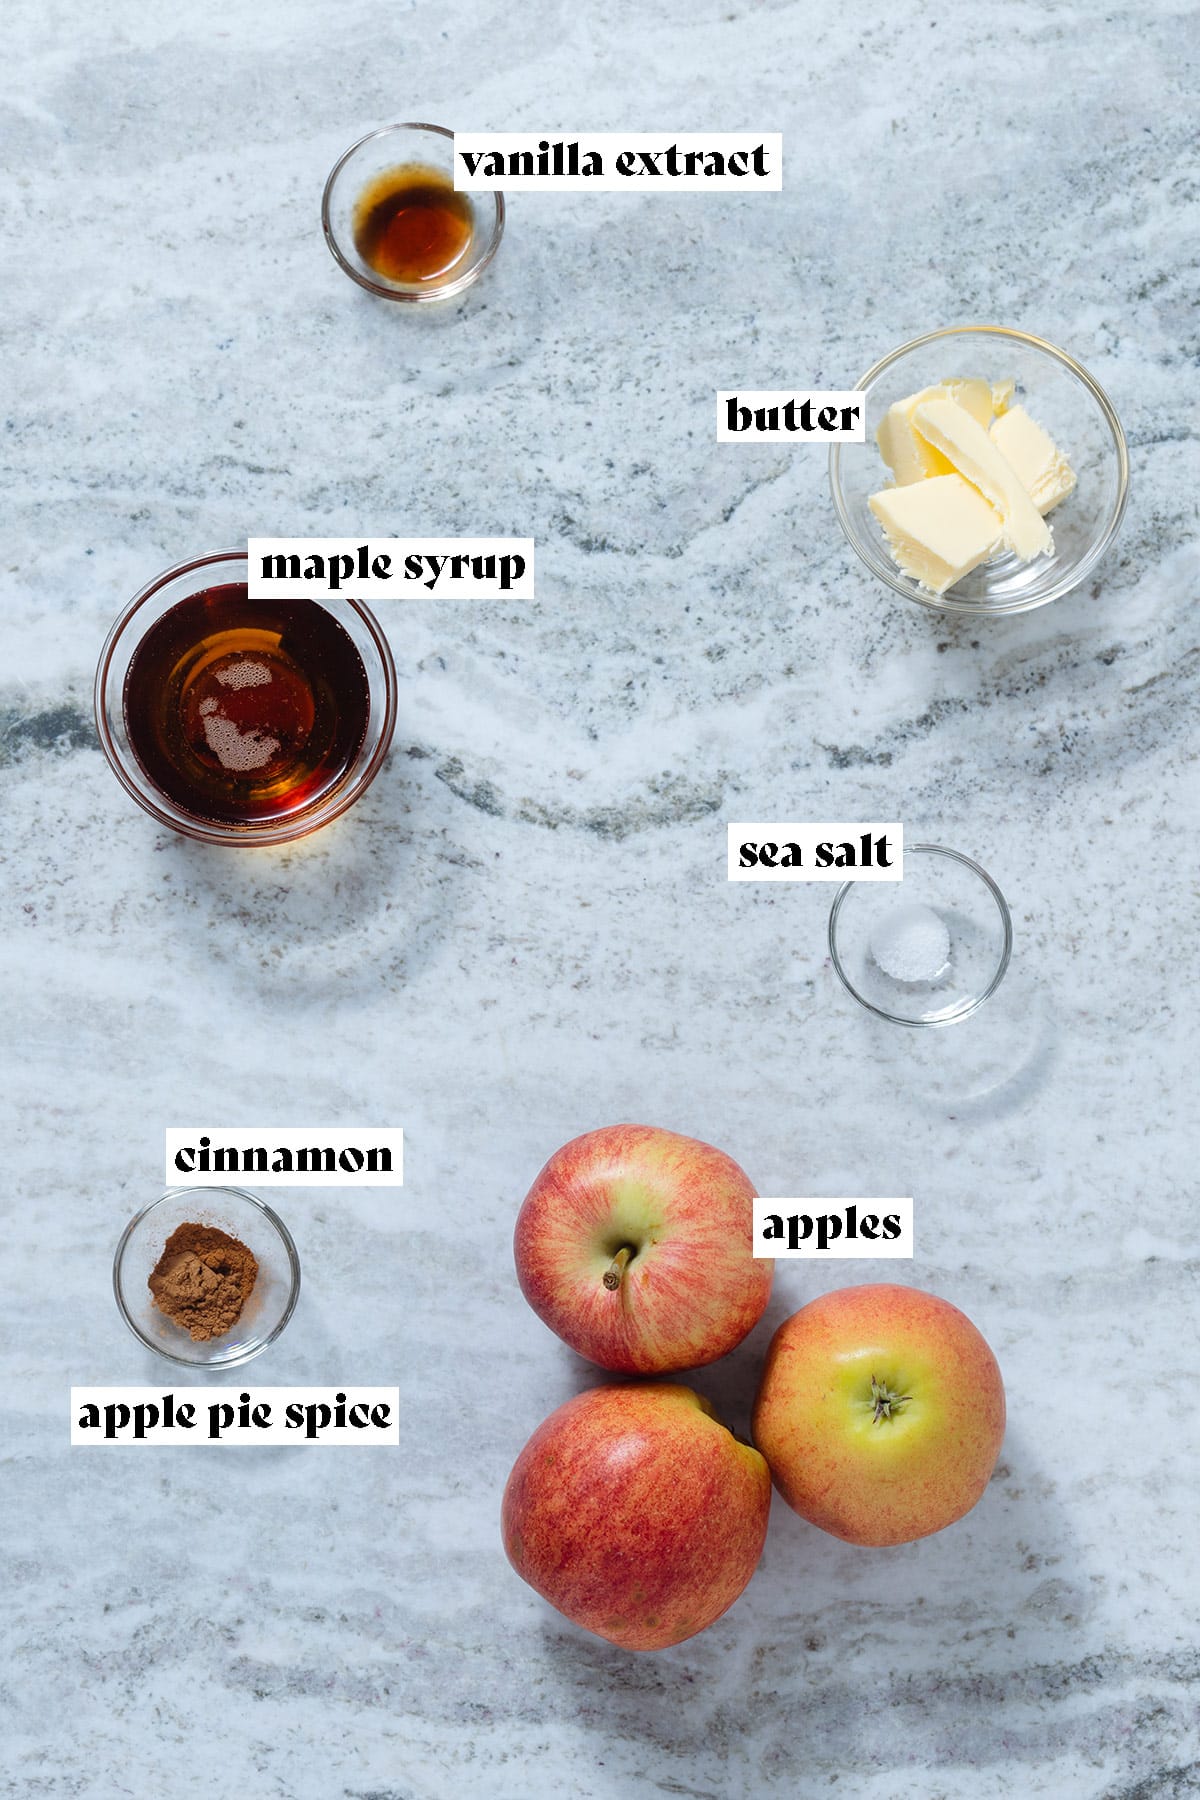 Ingredients like apples, butter, and maple syrup laid out on a grey stone background.